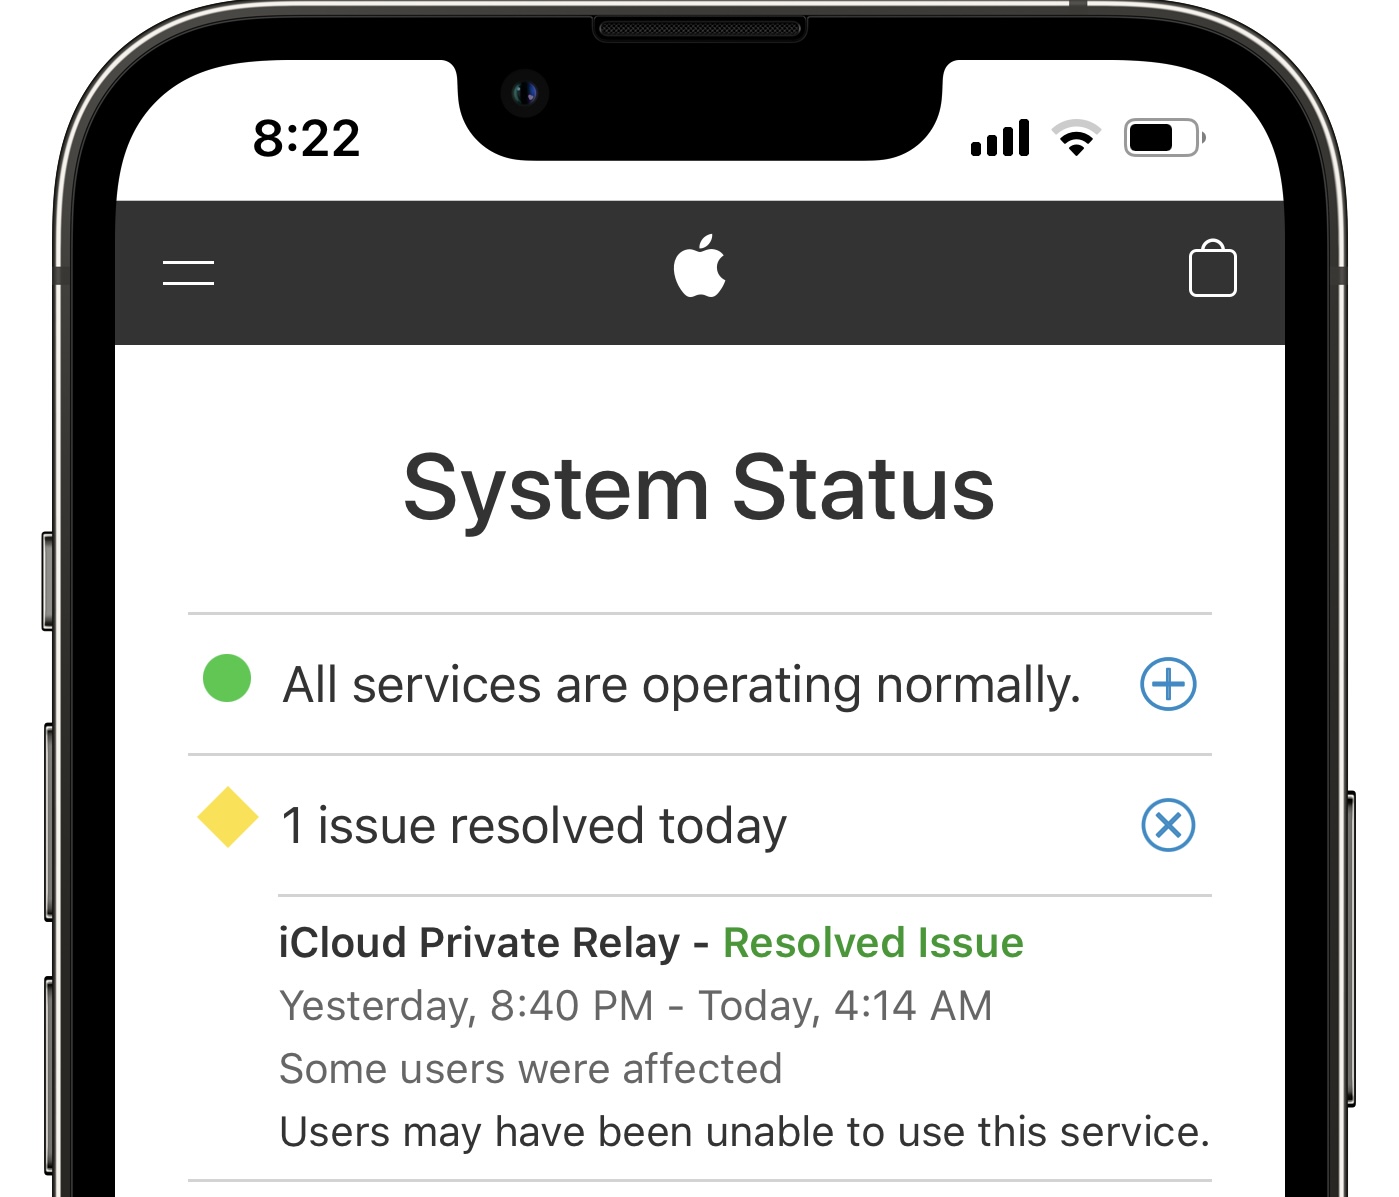 iCloud Private Relay issue fixed